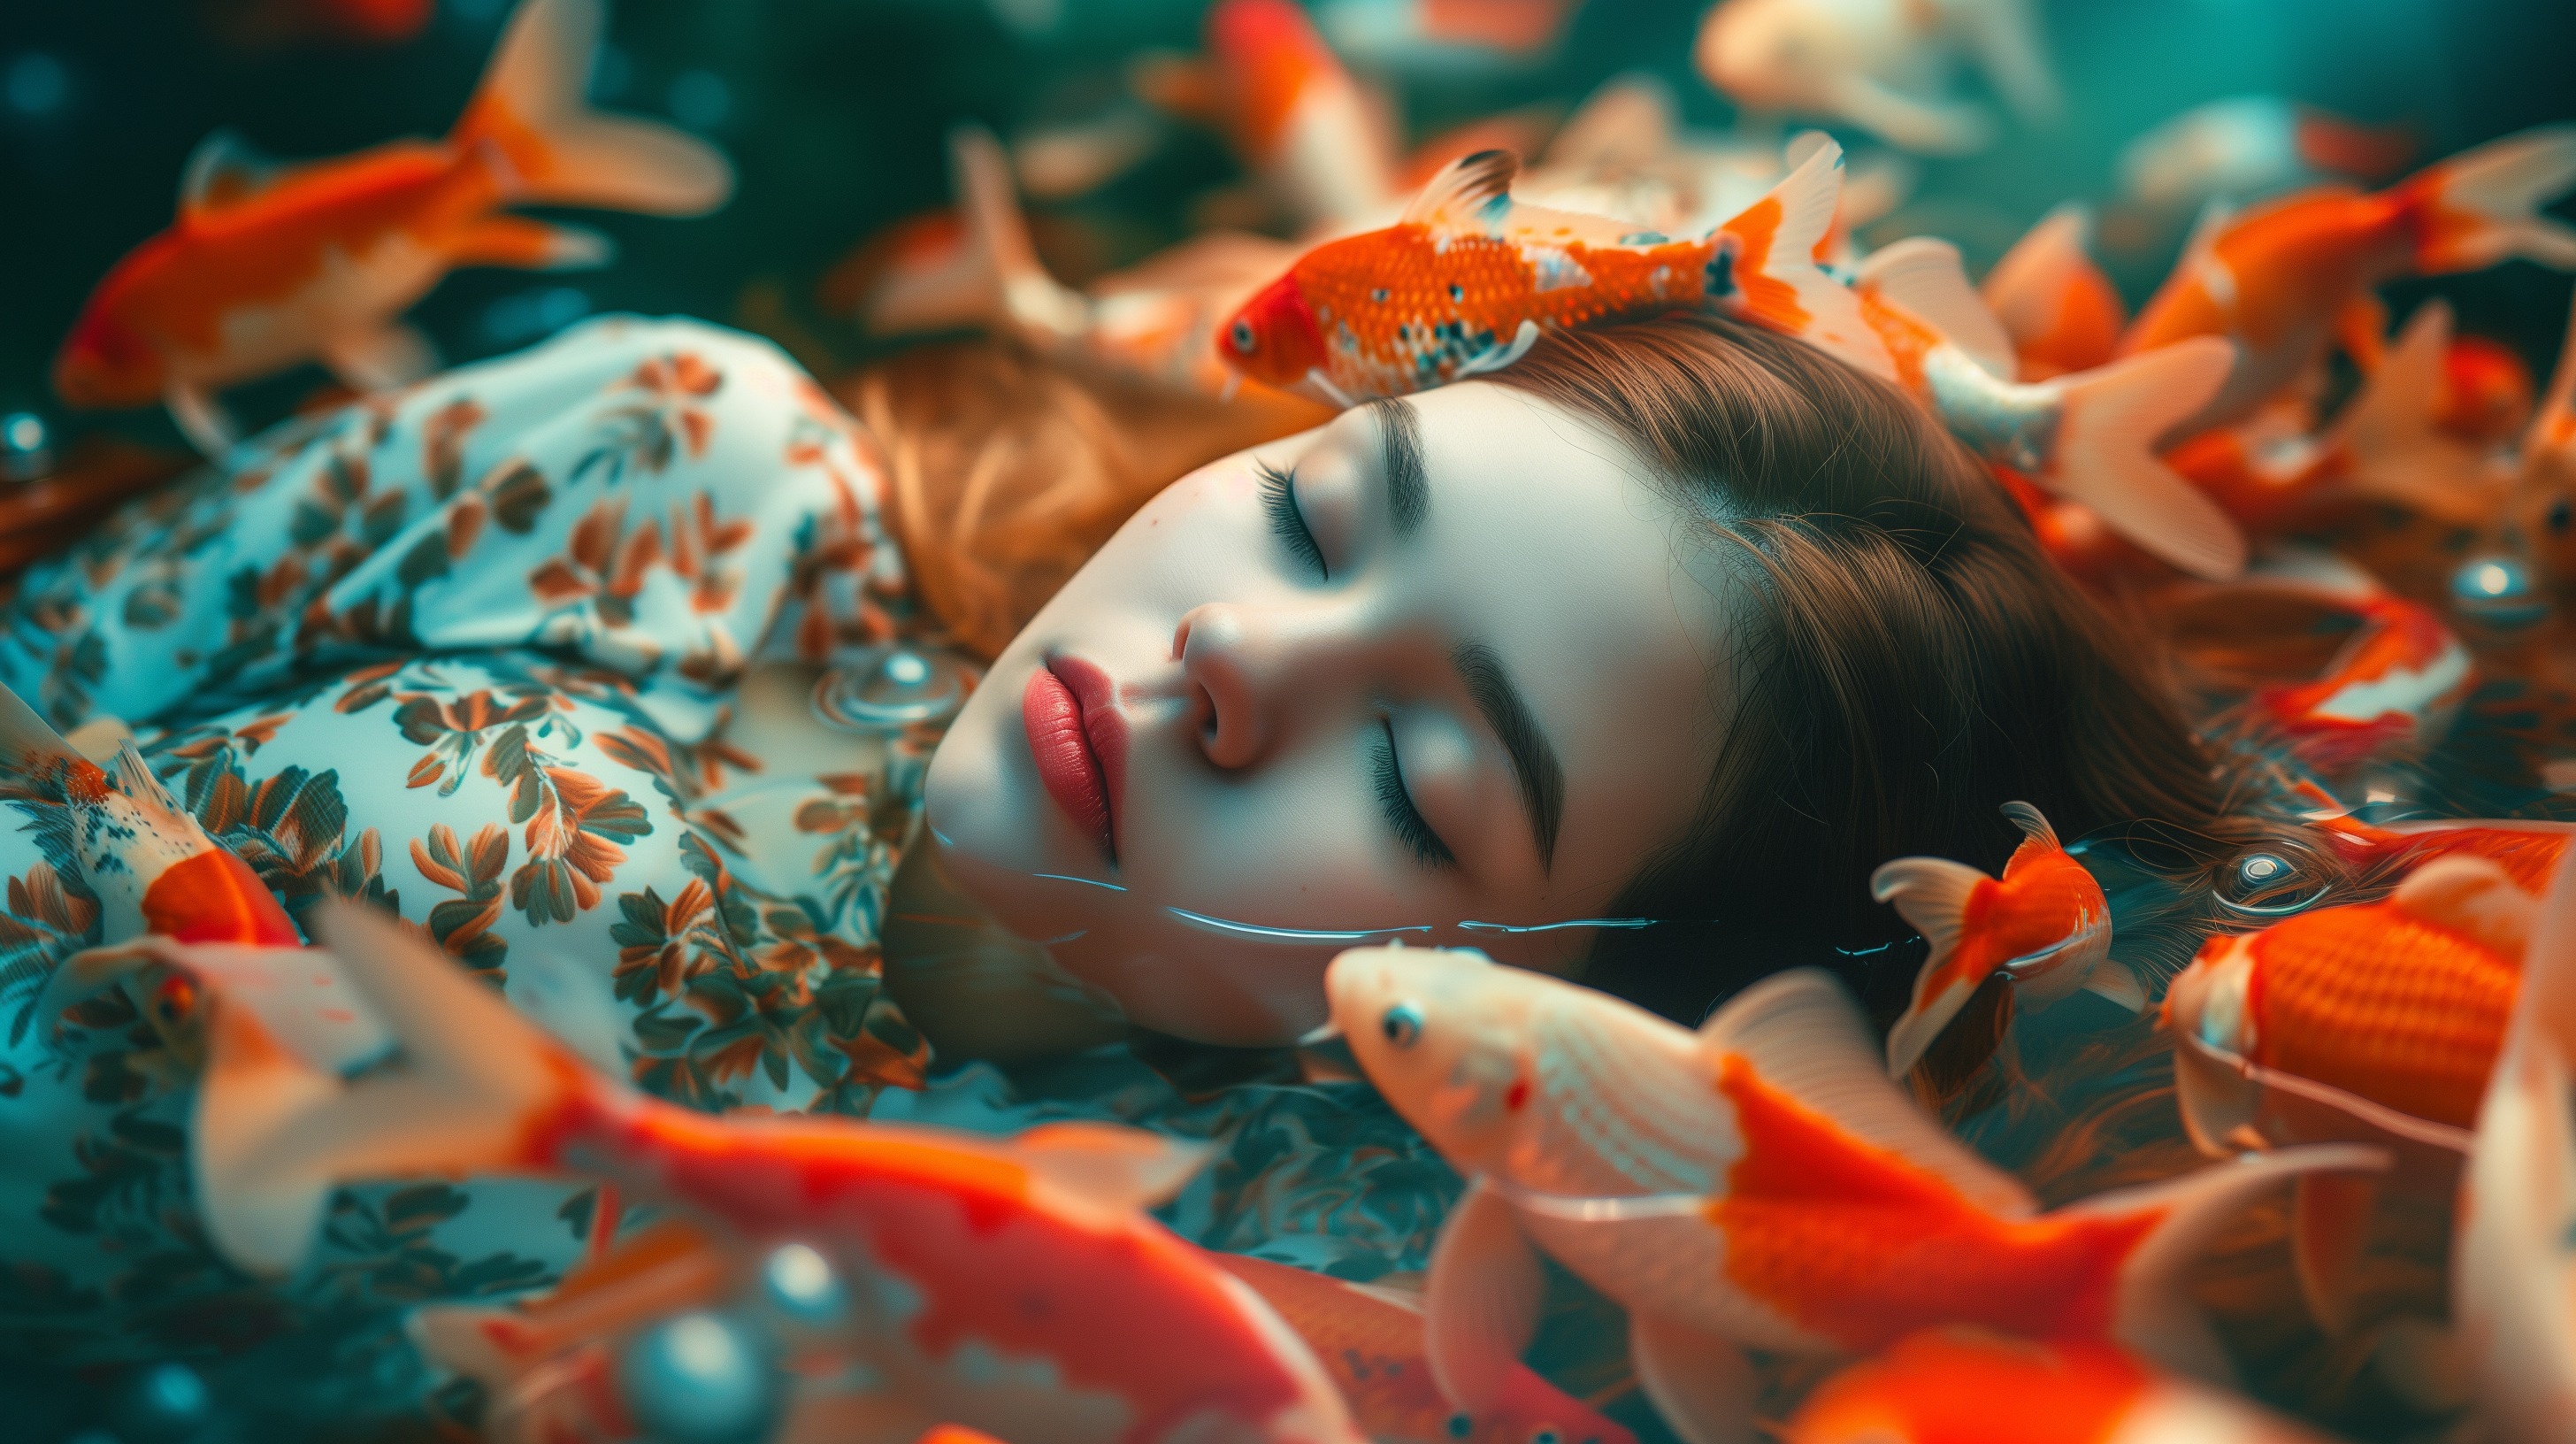 m2atk_A_beautiful_masked_female_model_sleeping_with_exotic_fish_ce4be2dc-b878-468c-b811-1986a80d1218